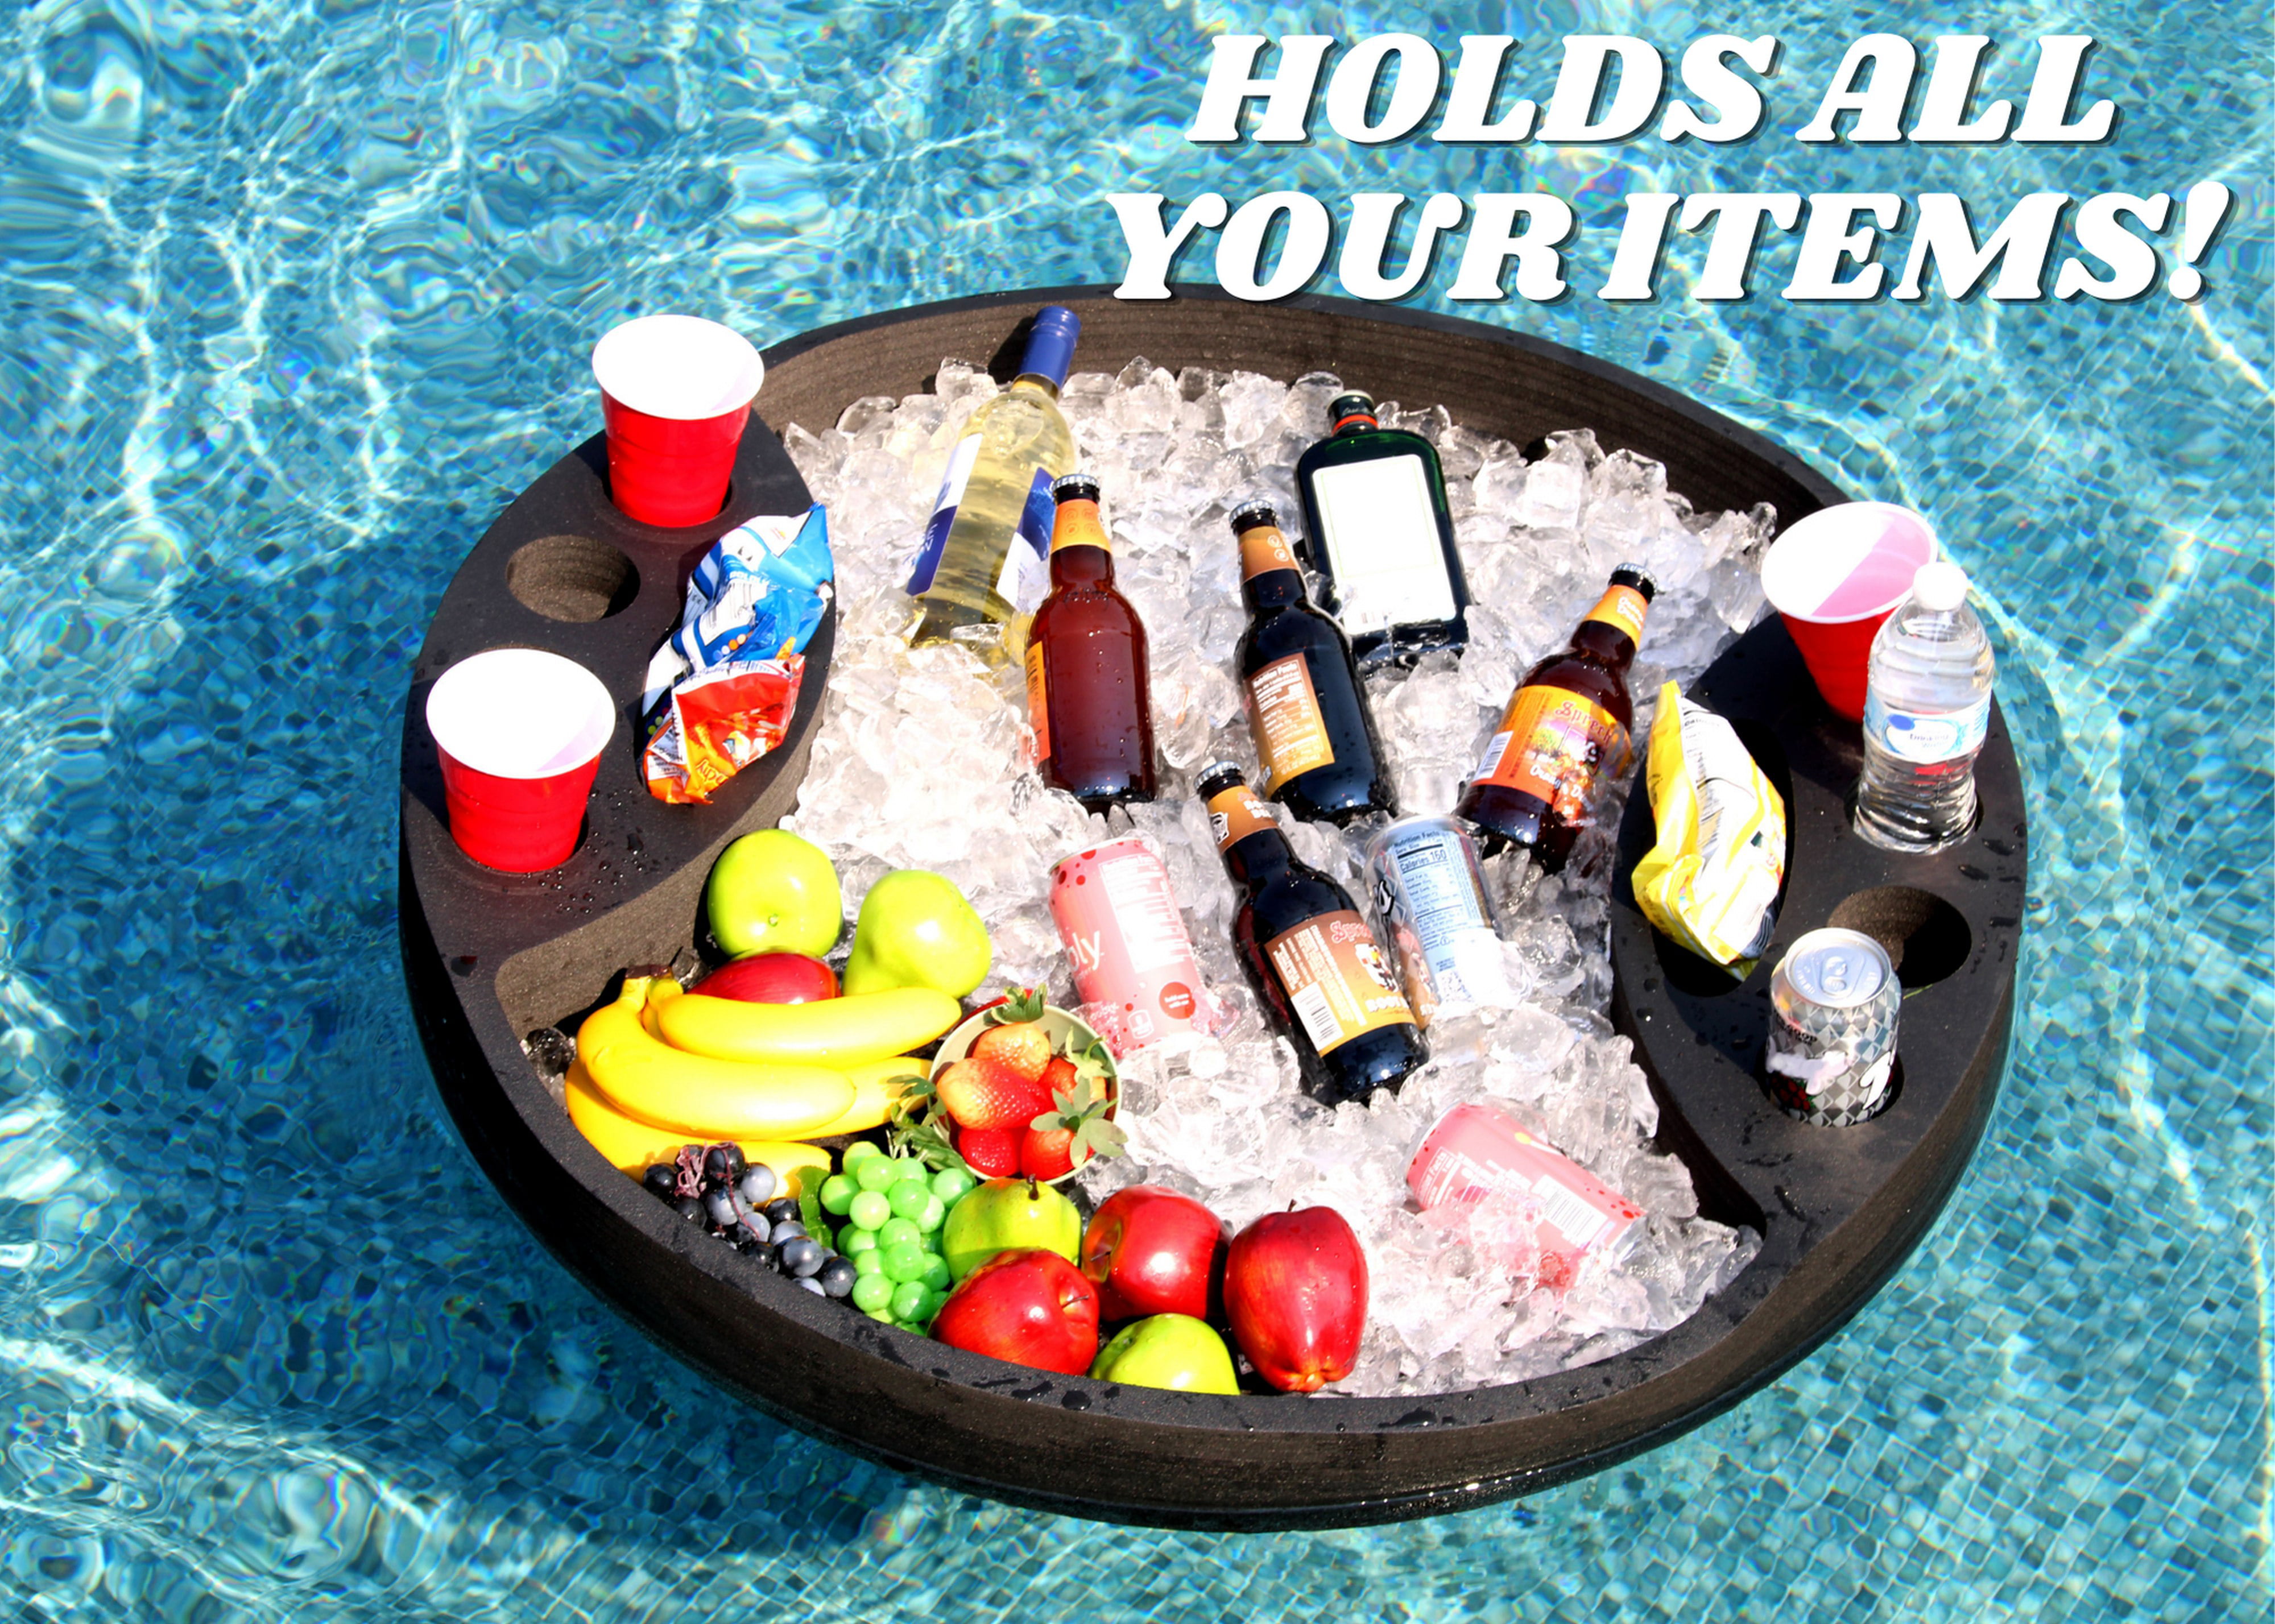 Off Road Tire Shaped Drink Holder Table Tray Pool or Beach Party Float –